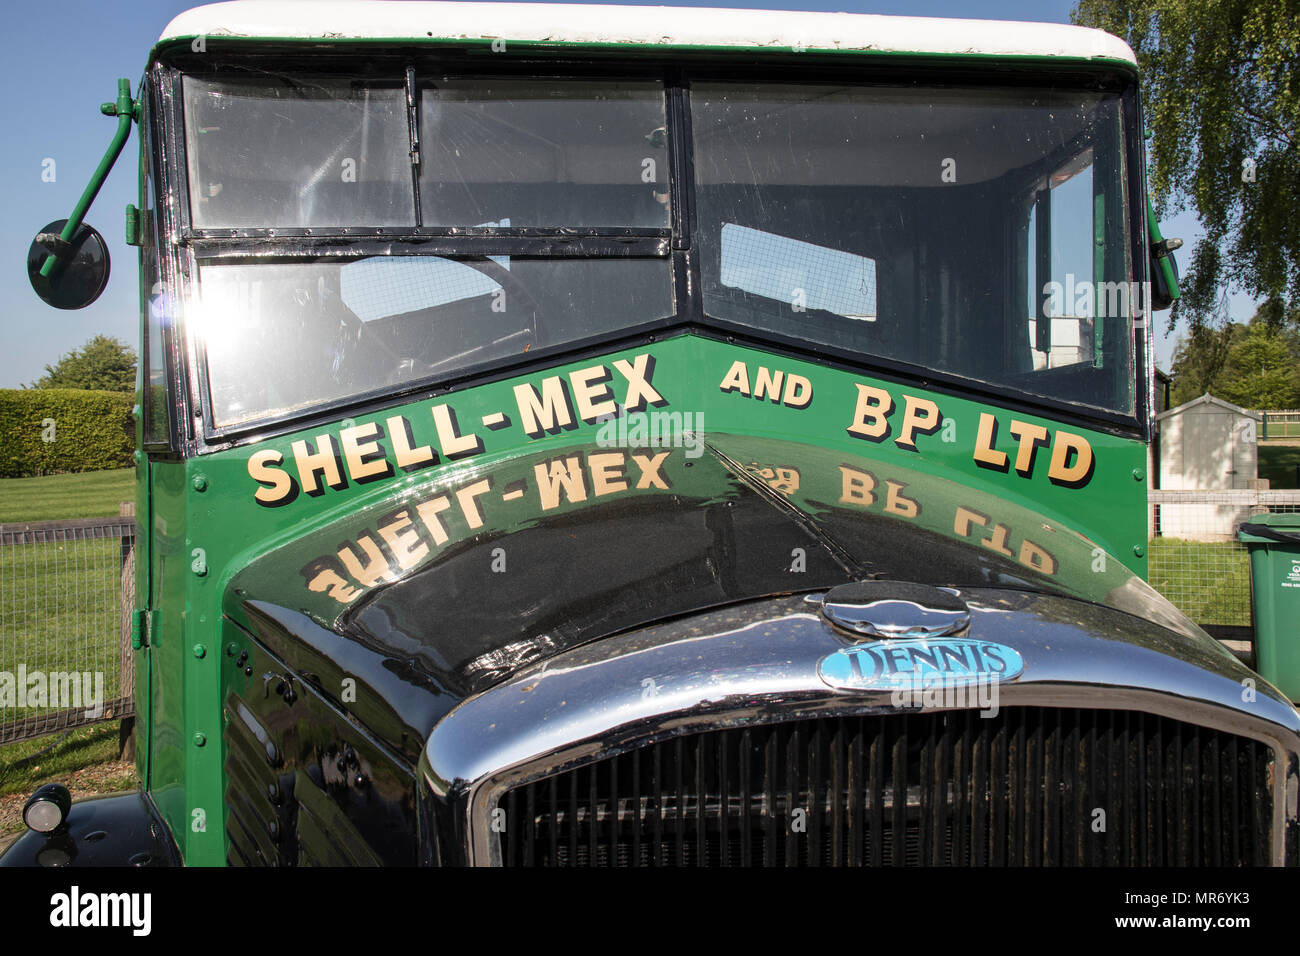 A Green Shell-Mex and BP vintage petrol tanker at Goodwood Airport at Goodwood, Sussex, UK Stock Photo